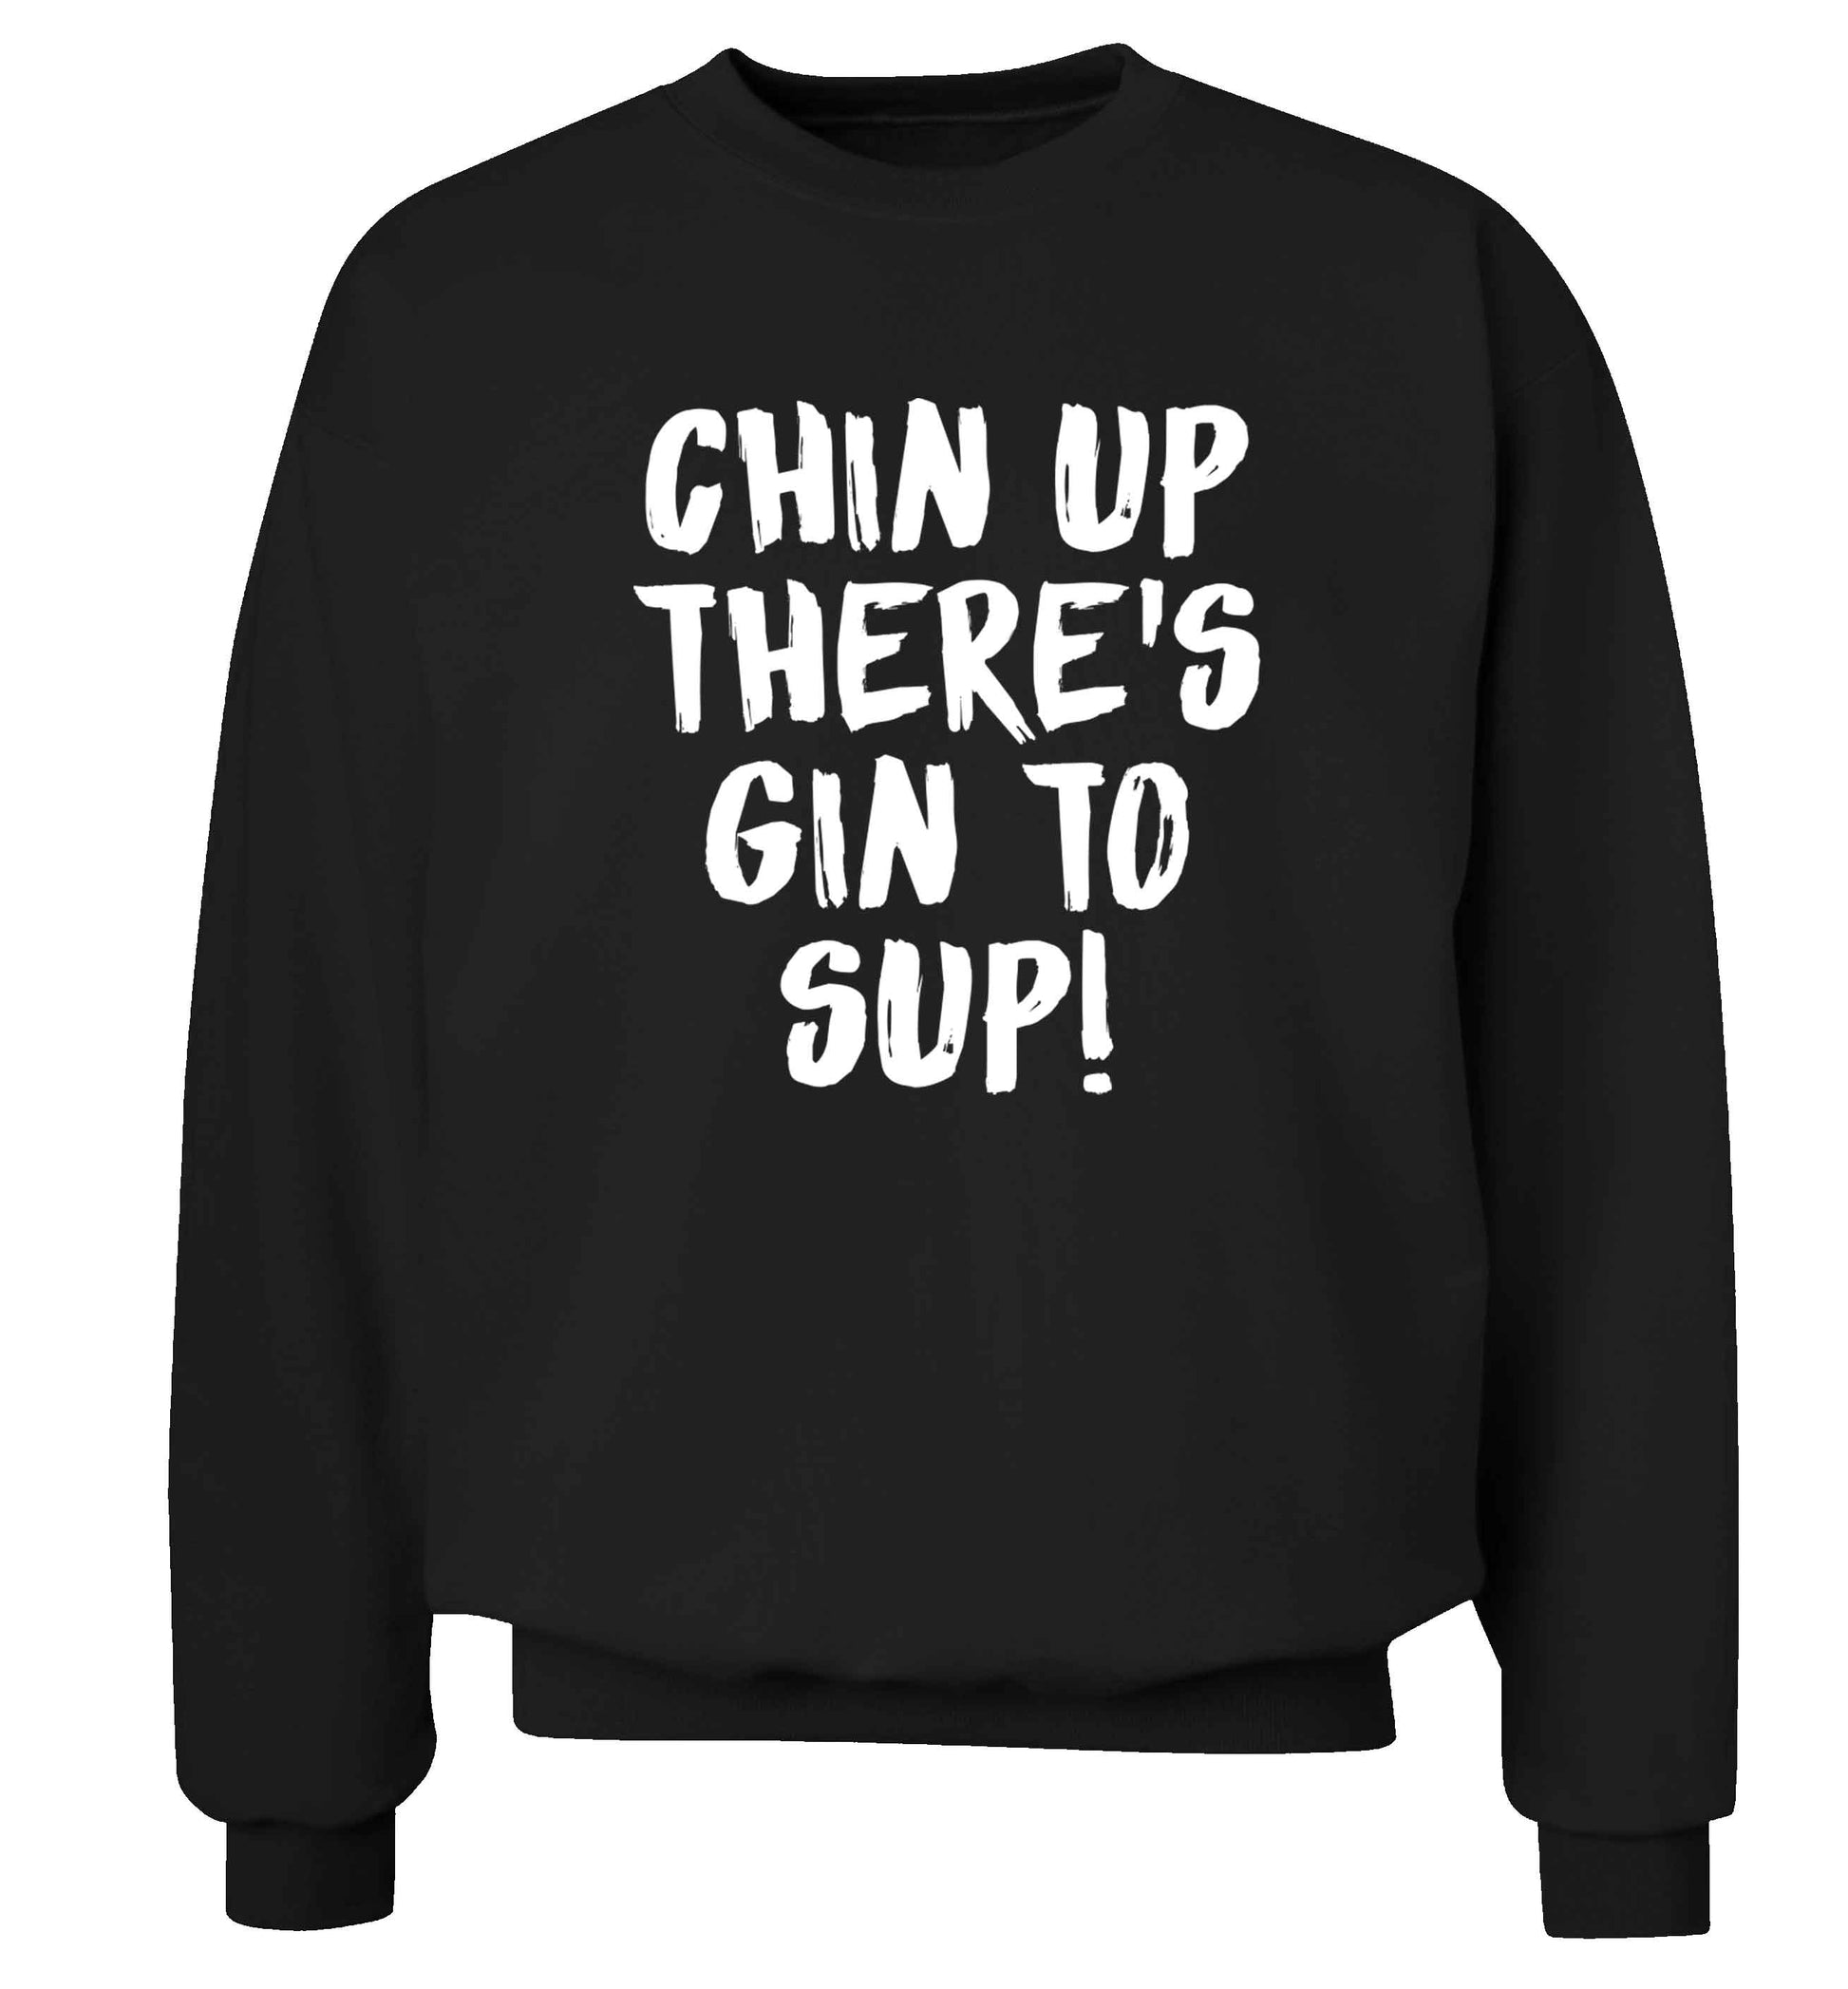 Chin up there's gin to sup Adult's unisex black Sweater 2XL